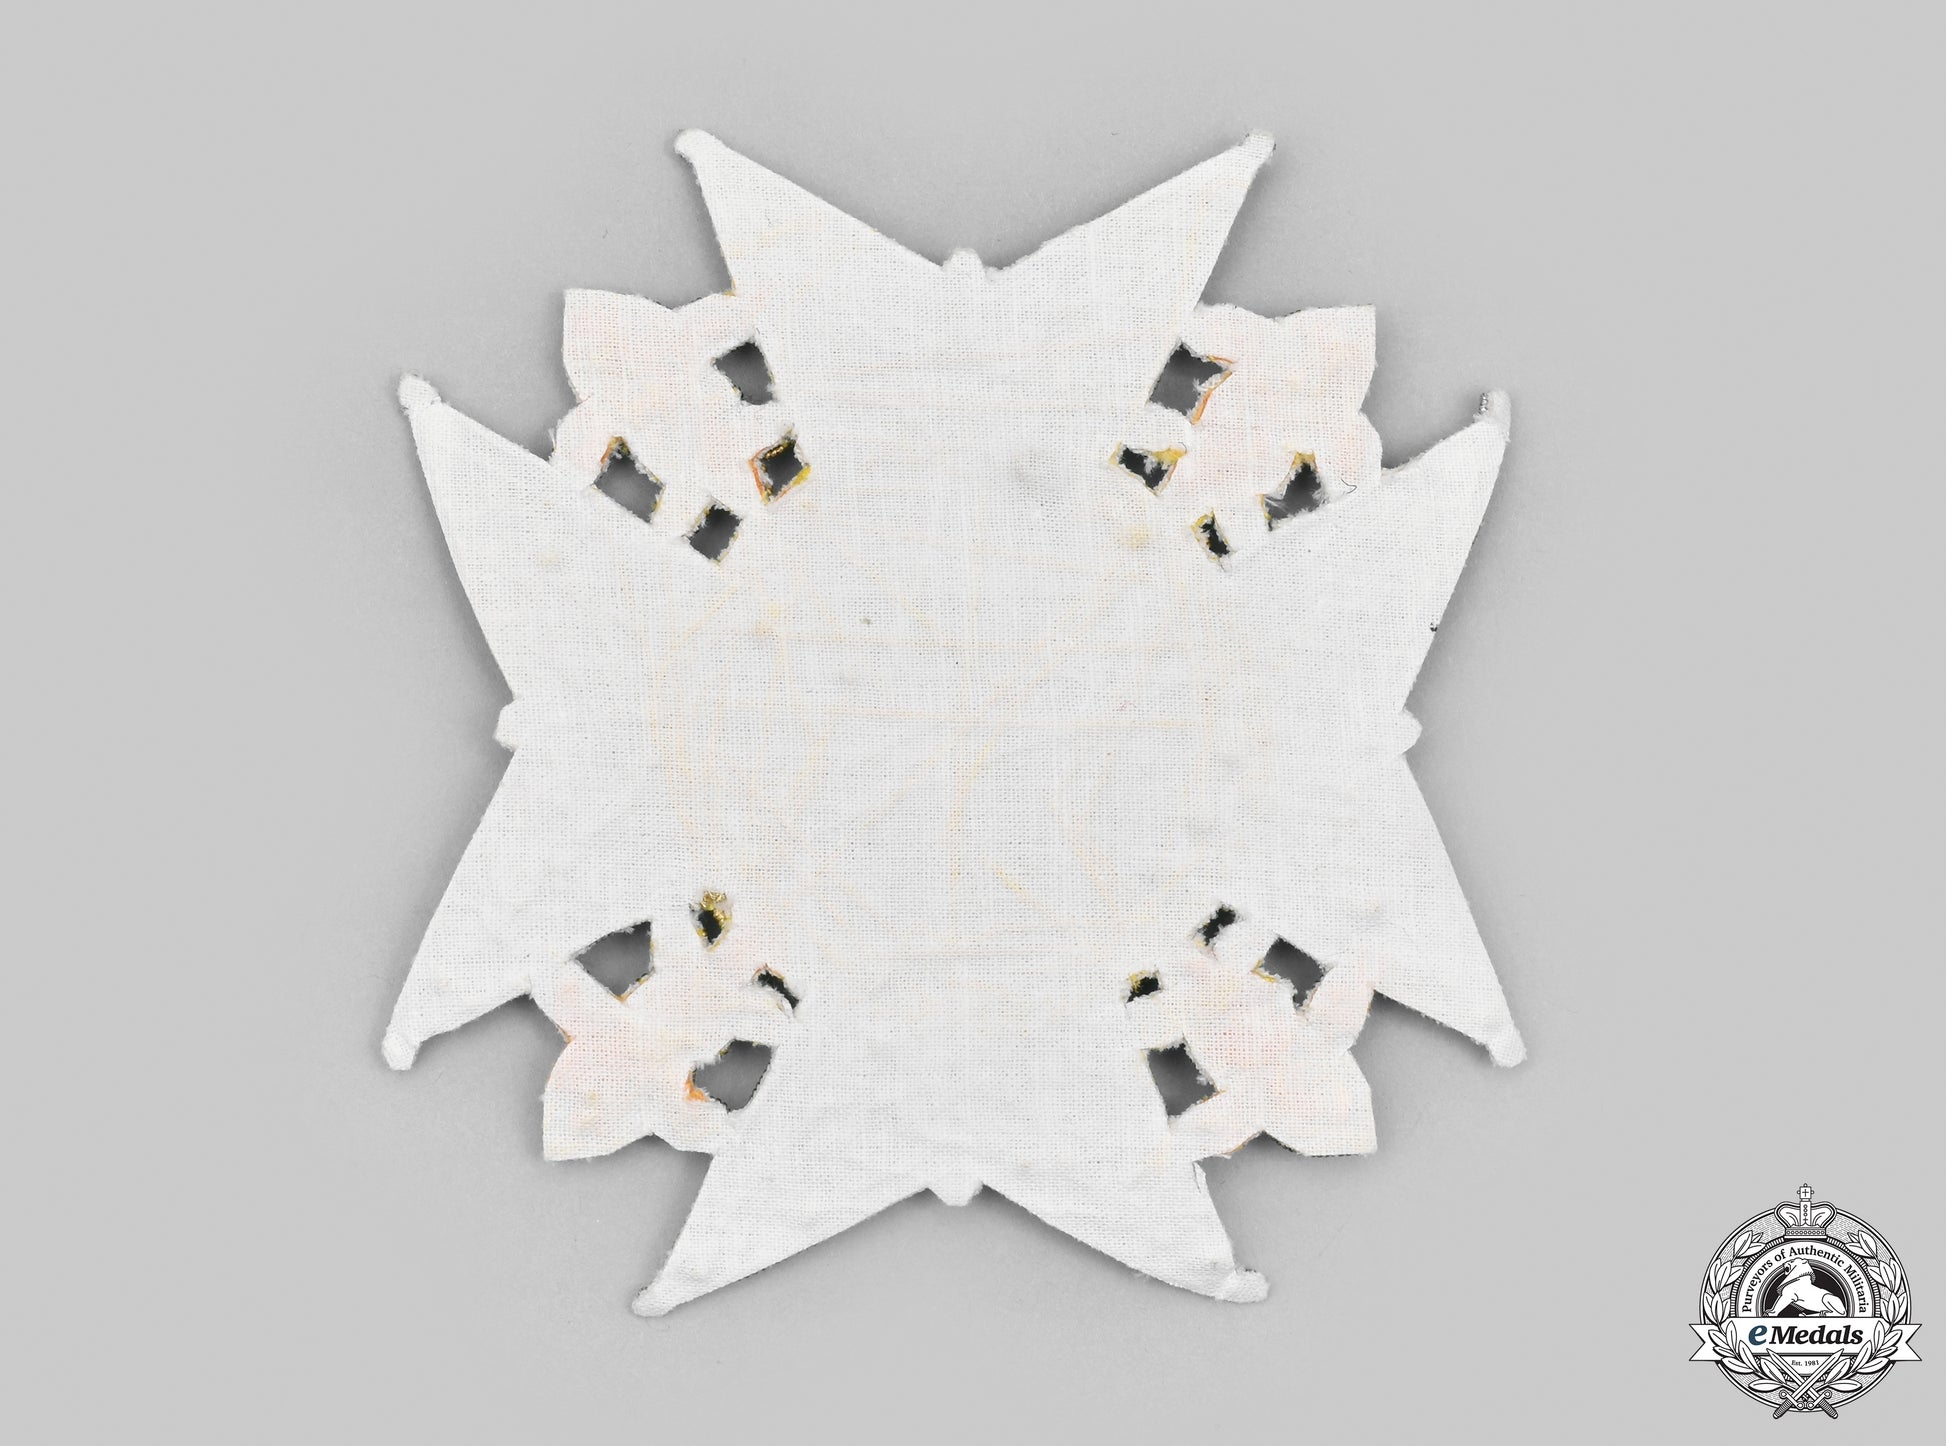 italy,_kingdom_of_the_two_sicilies._a_royal_order_of_francis_i_embroidered_breast_badge,_modern_issue_c.1975_cic_2021_191_mnc9810_1